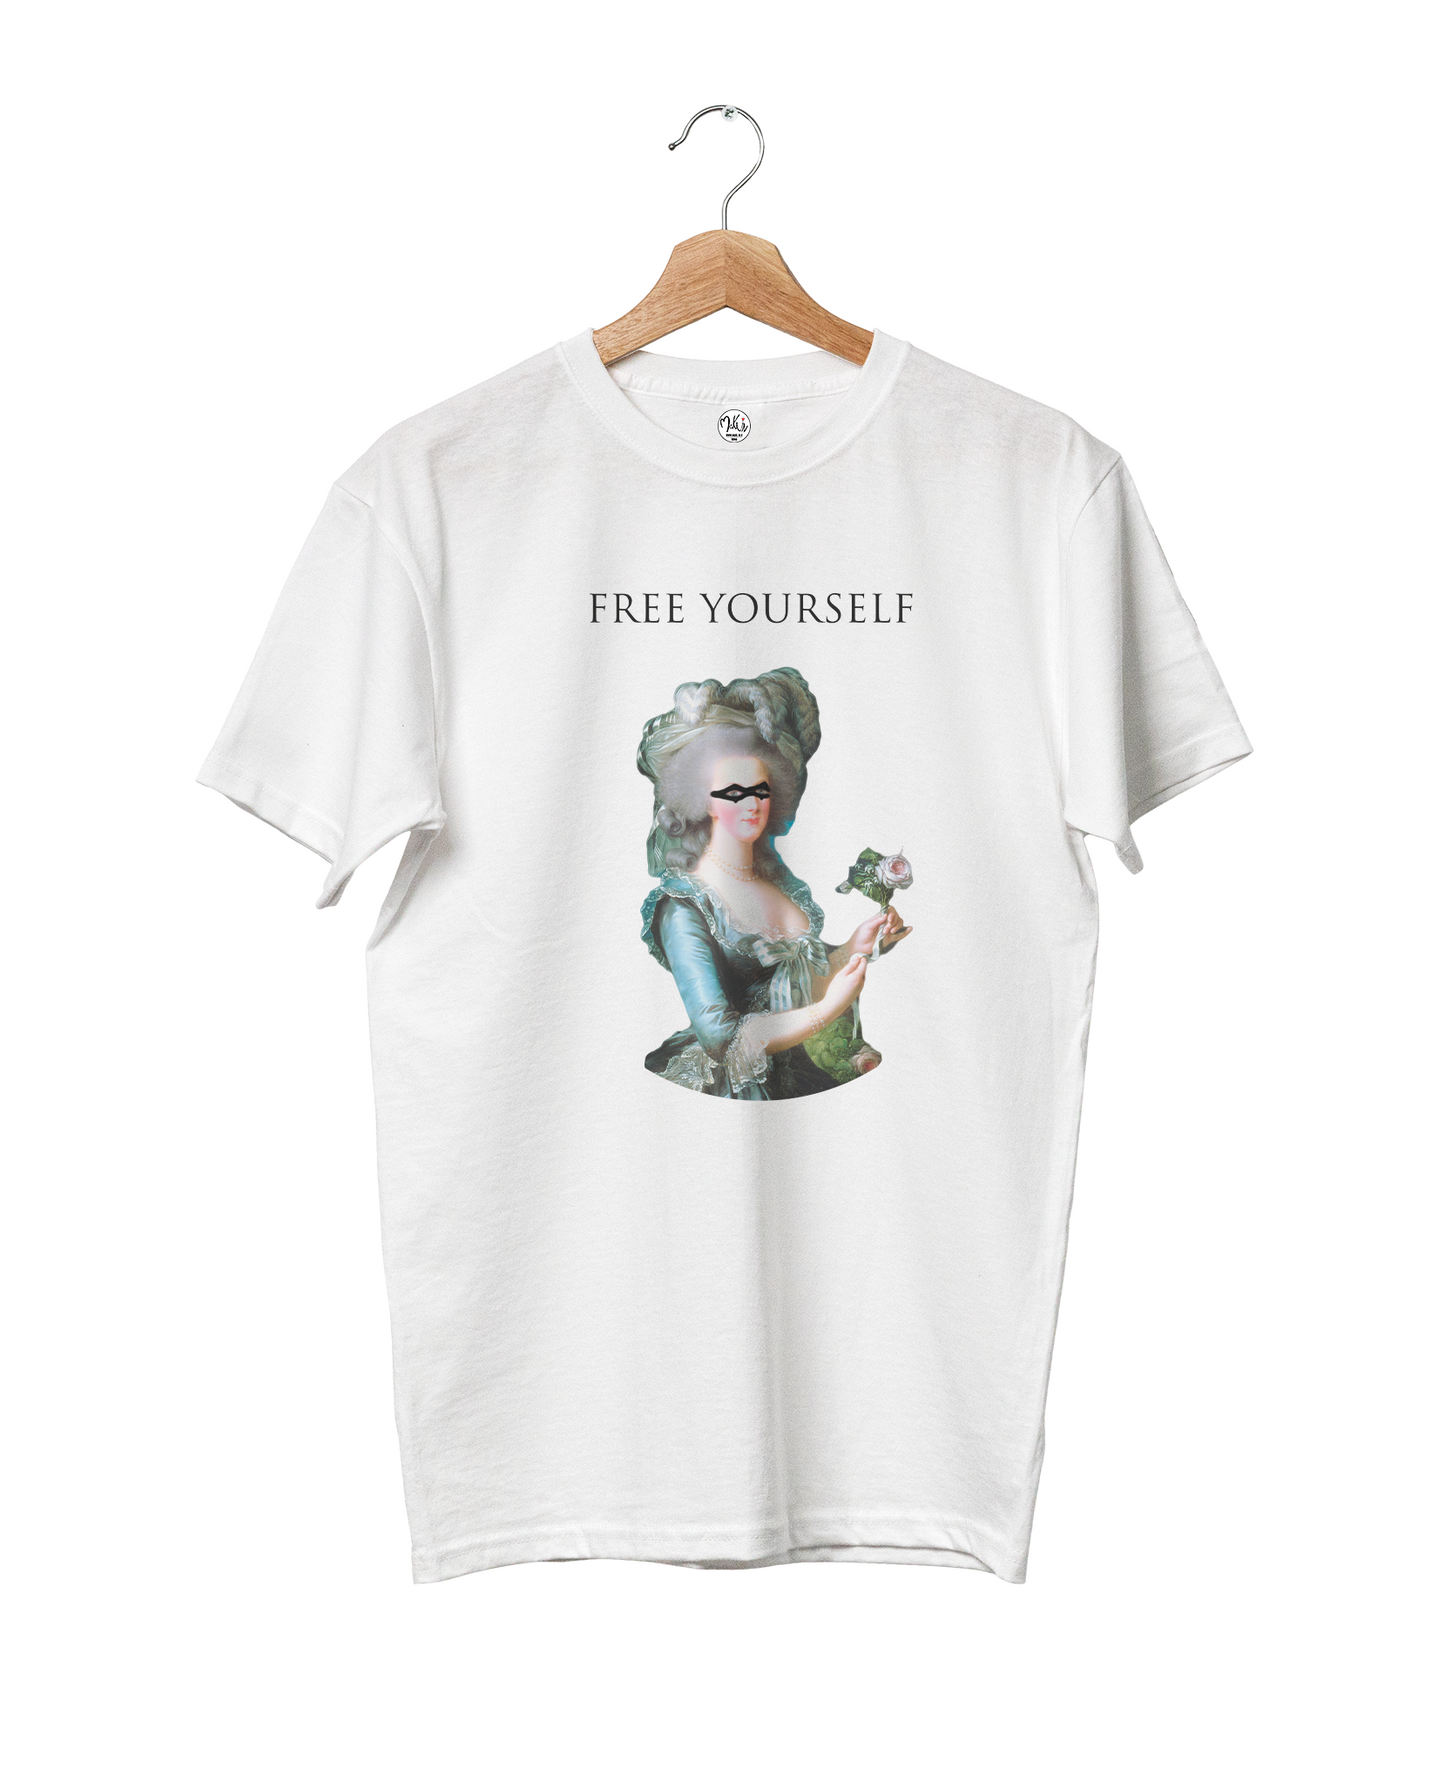 T-shirt Marie Antoinette - FREE YOURSELF